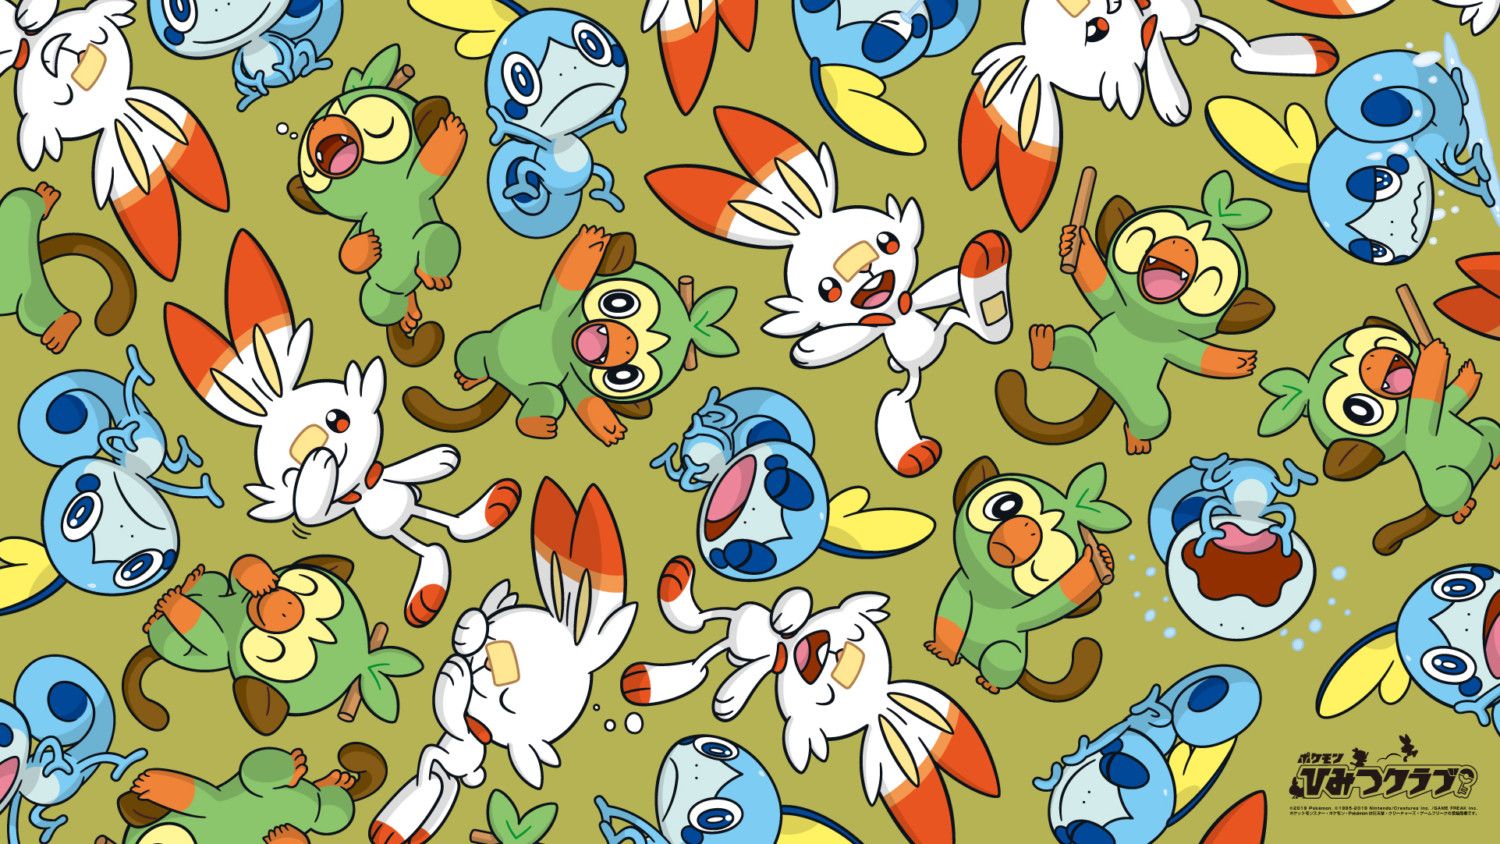 Download This Pokemon Secret Club Wallpaper For Your PC And Smartphone